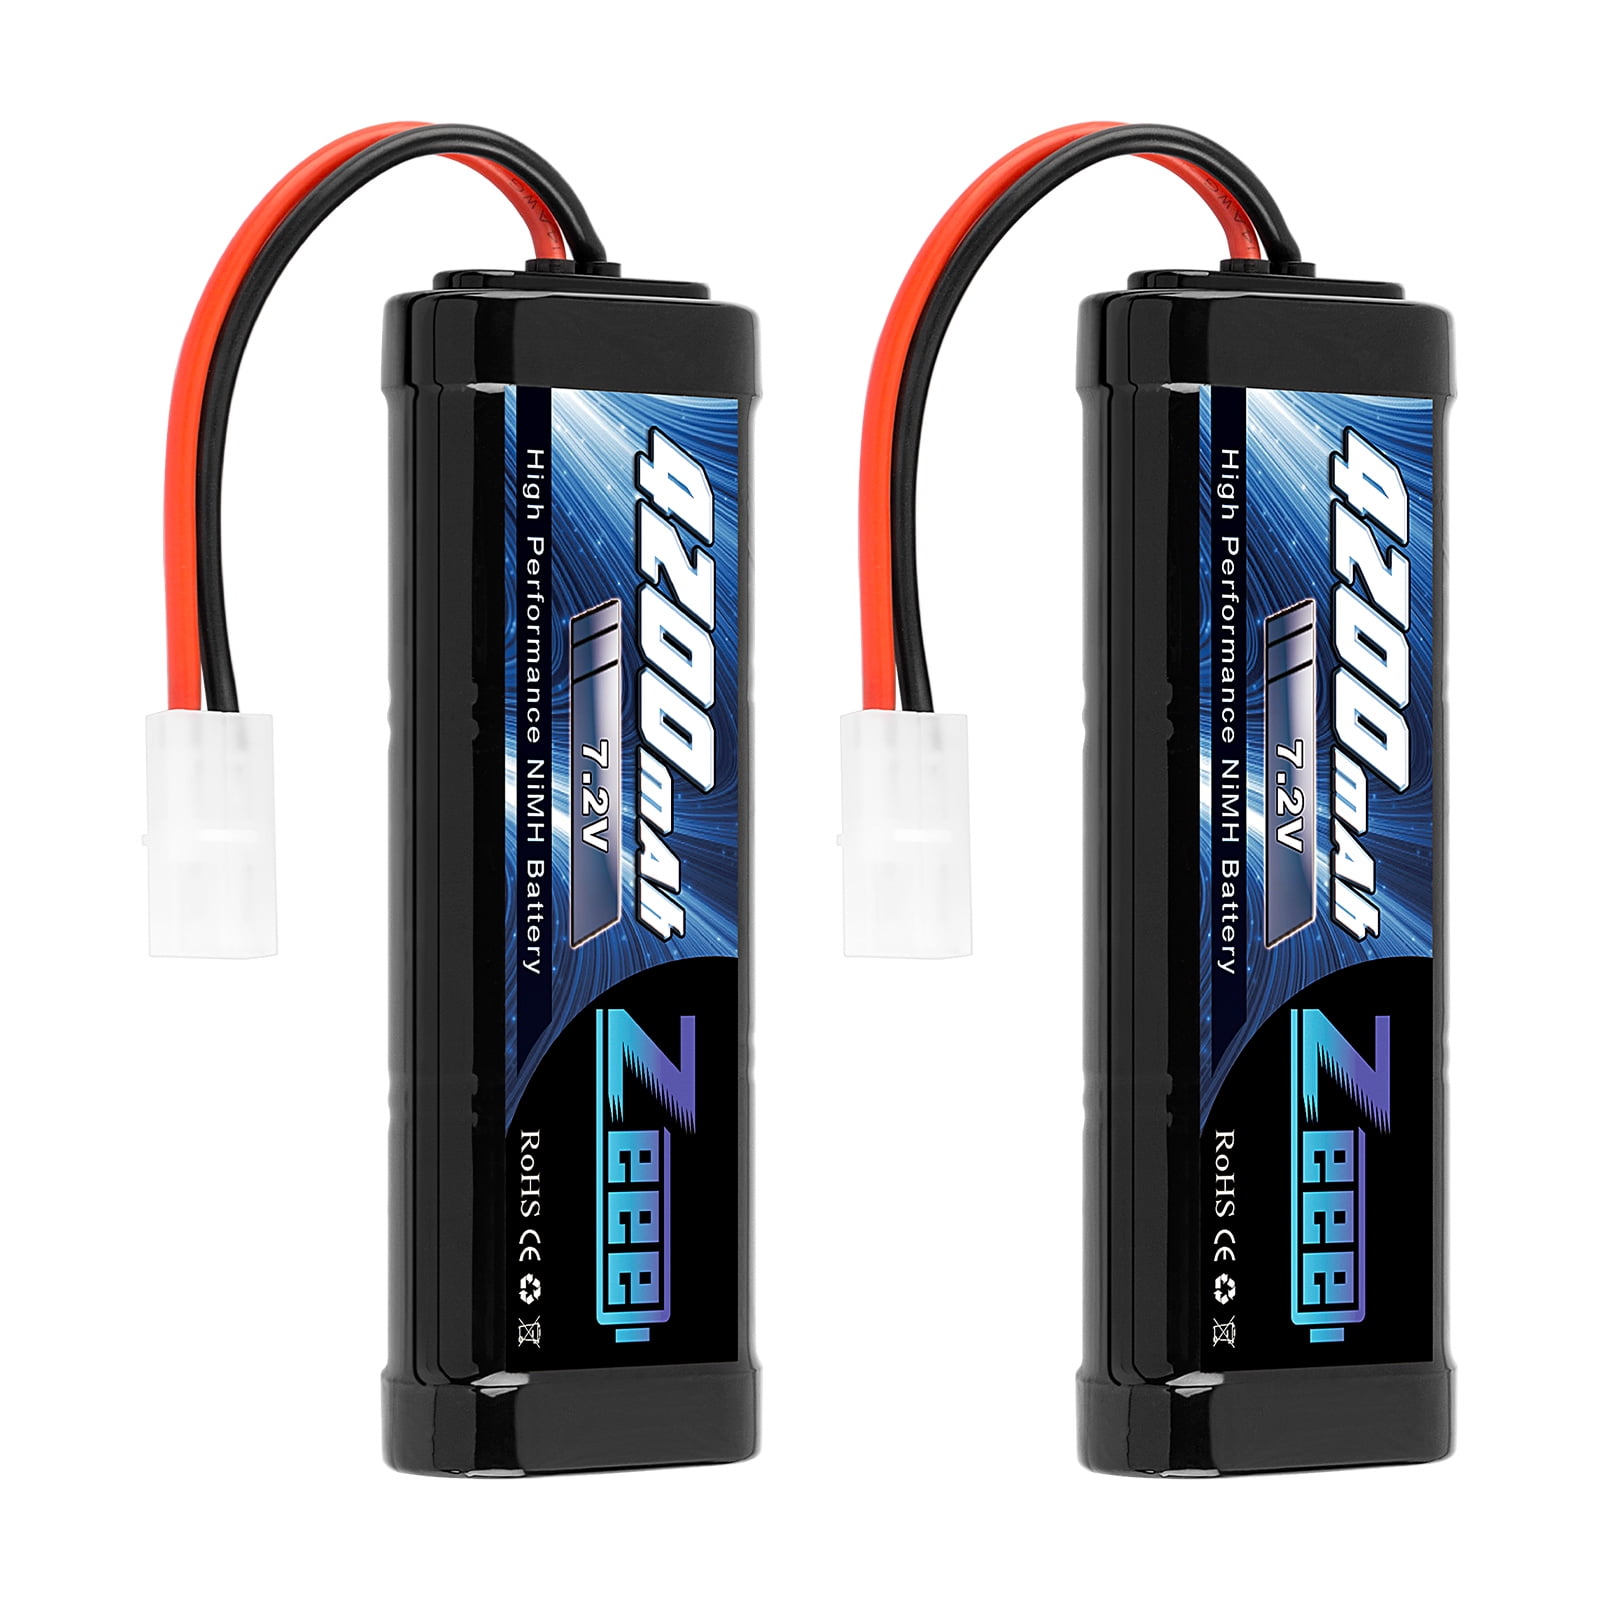 2-Pack Tenergy 7.2V Battery Pack for RC Car Replacement Hobby Battery with Standard Tamiya Connector High Capacity 6-Cell 3800mAh NiMH Flat Battery Pack 